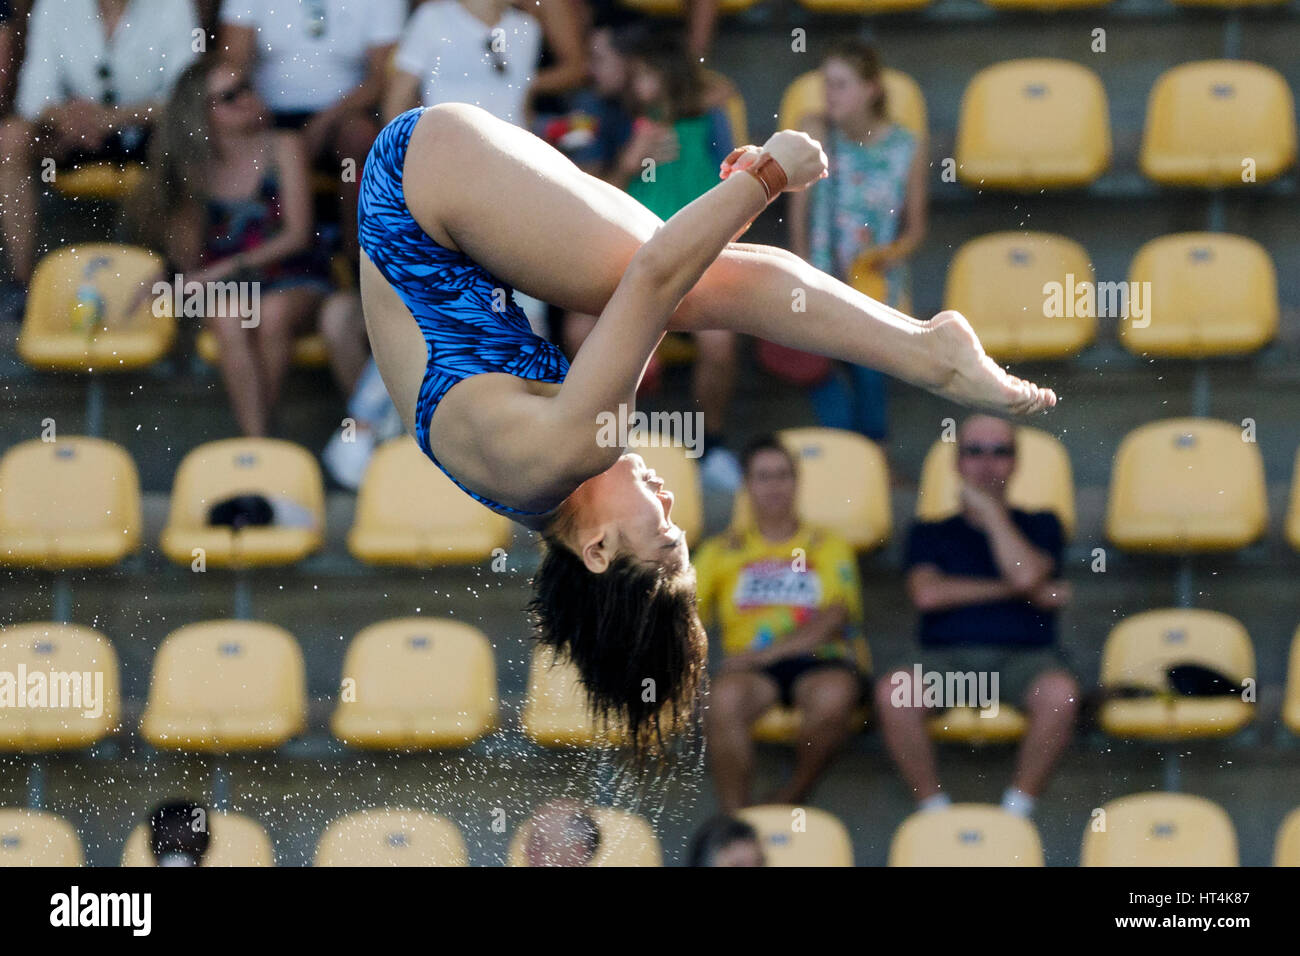 Rio de Janeiro, Brazil. 18 August 2016 Nur Dhabitah Sabri  (MAS) competes in the Women Diving Platform 10m preliminary at the 2016 Olympic Summer Game Stock Photo